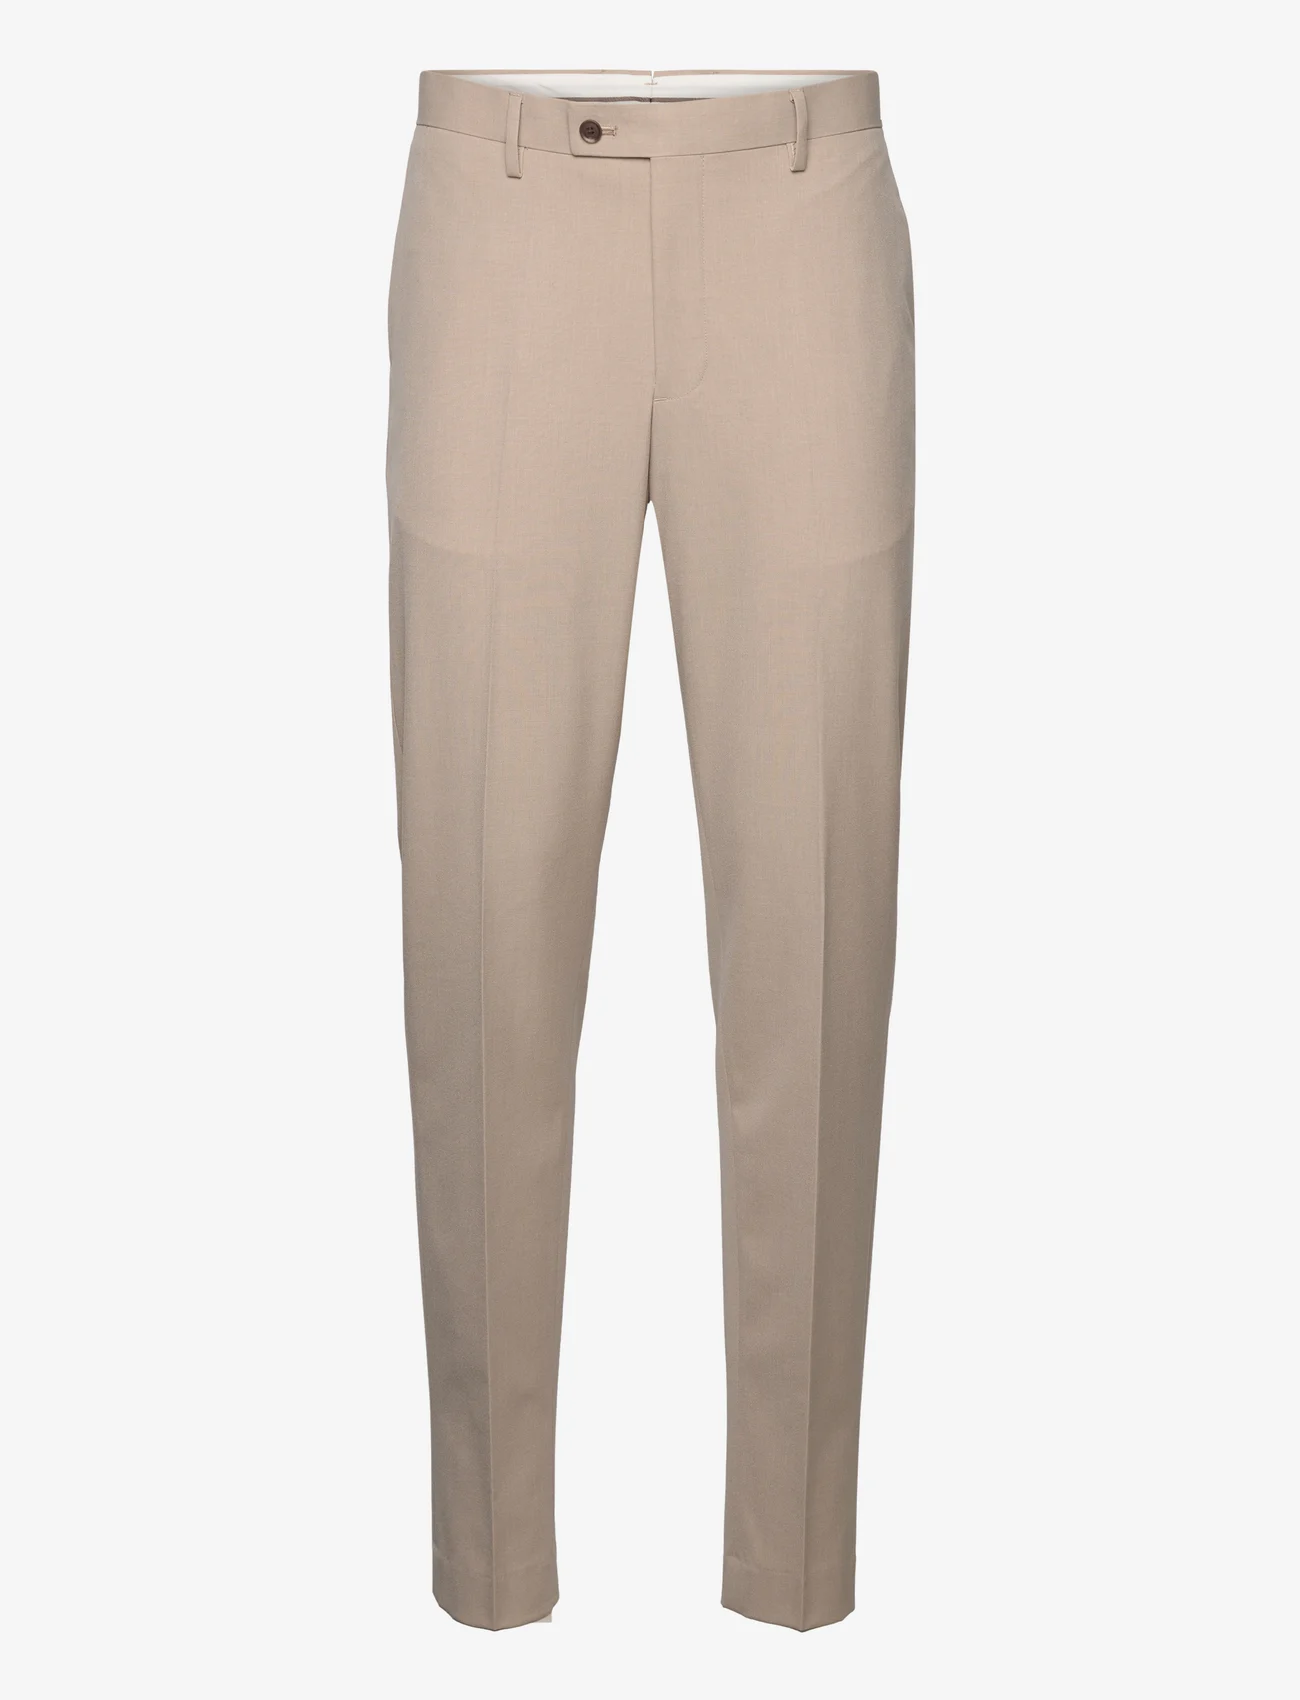 Mango - Suit trousers - chinos - light beige - 0